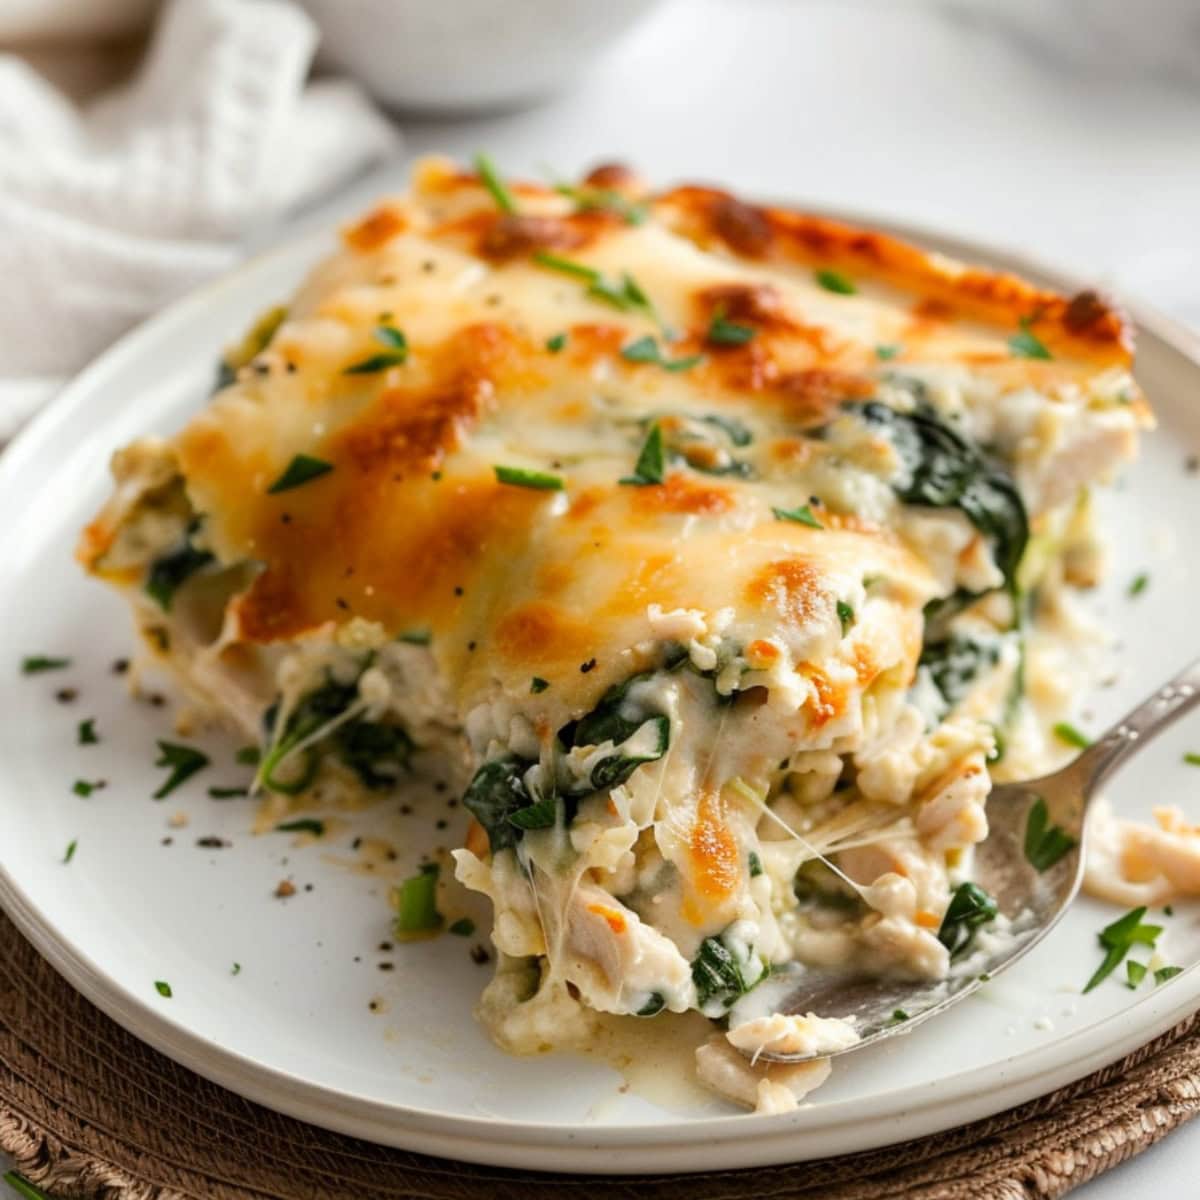 A serving of chicken and spinach casserole on a plate with spoon.